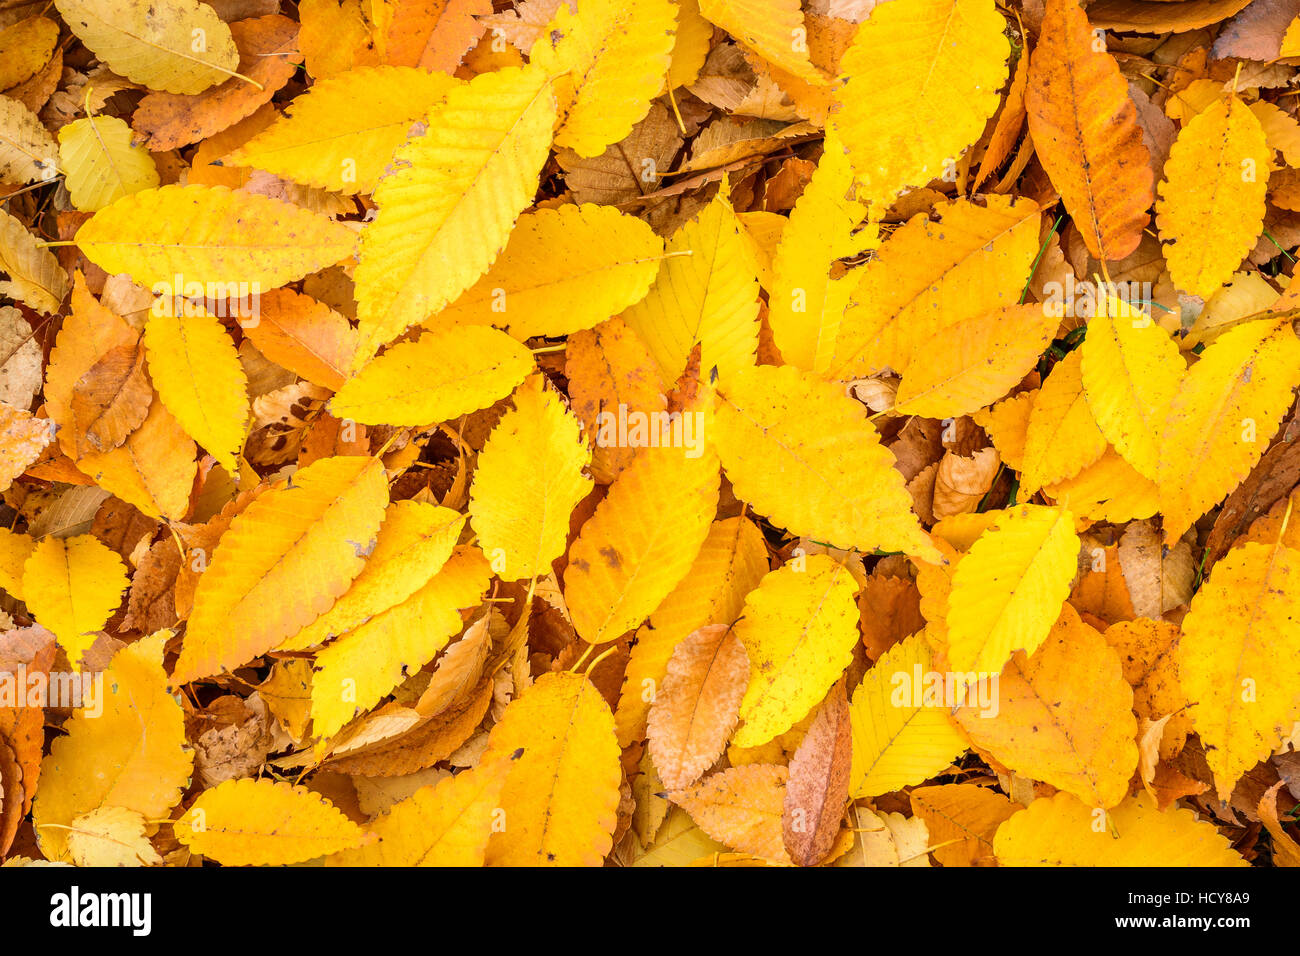 A background with golden yellow autumn leaves Stock Photo